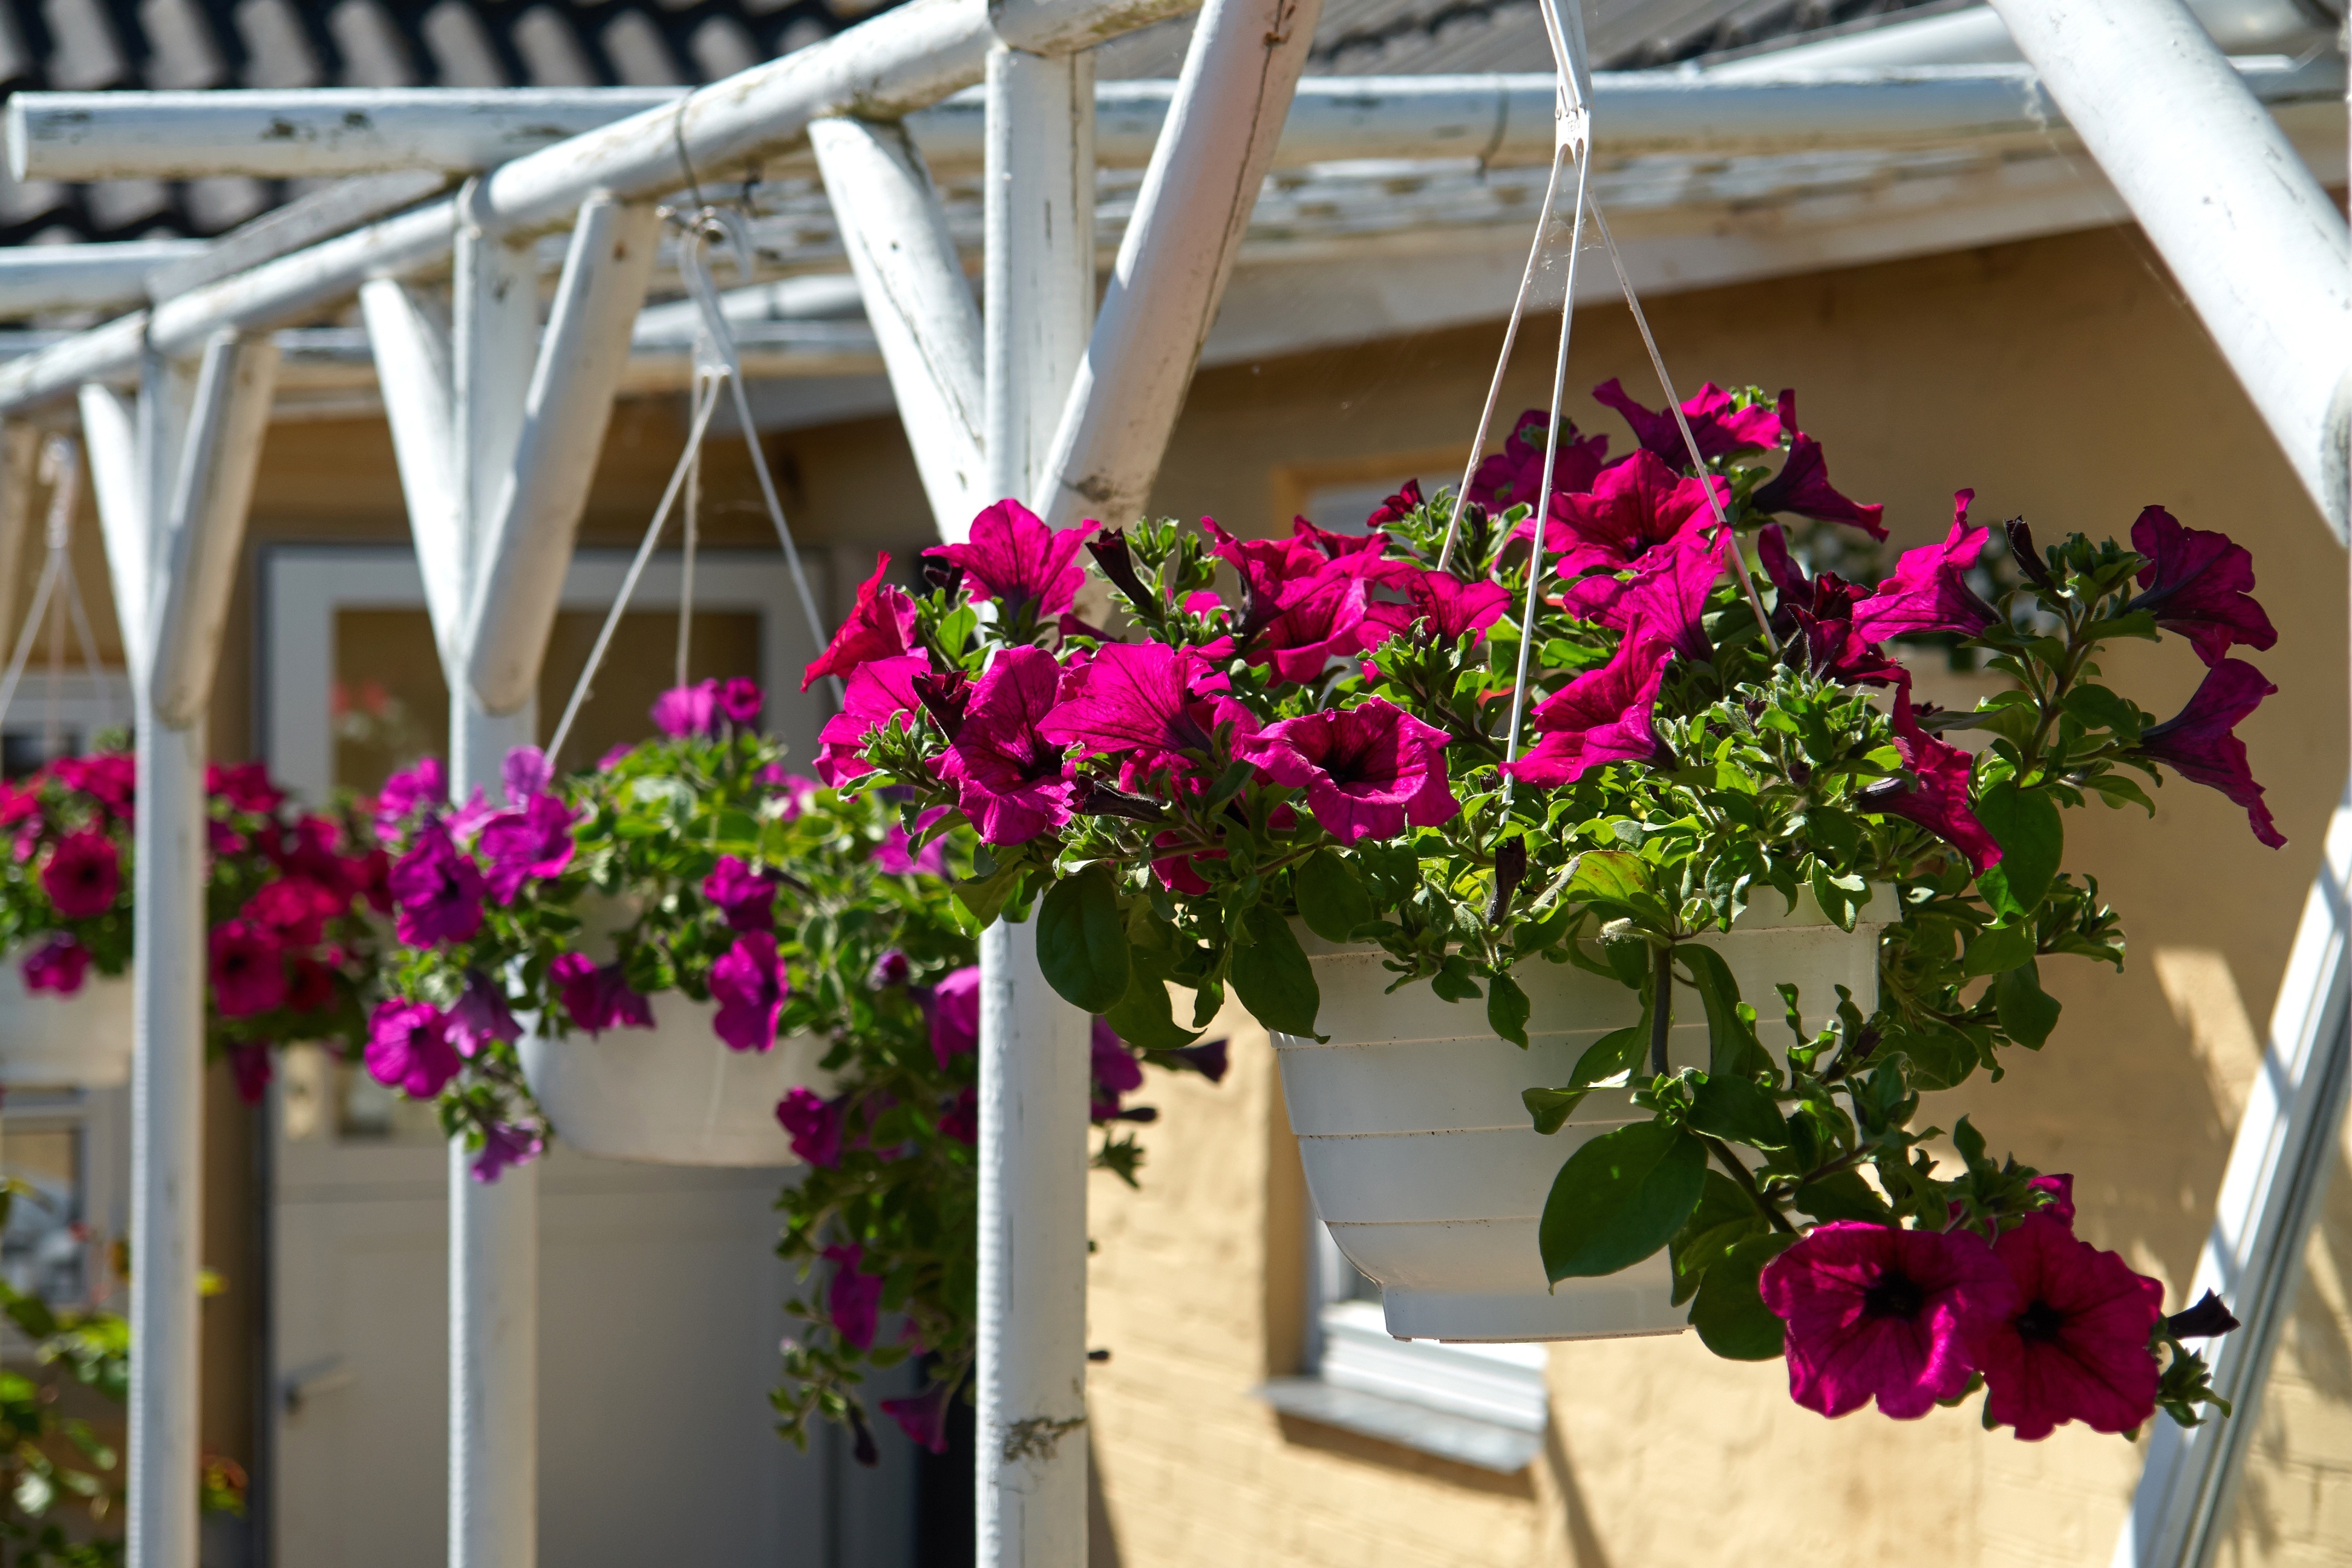 21802296 - beautiful hanging flowerpot basket with red flowers in a garden